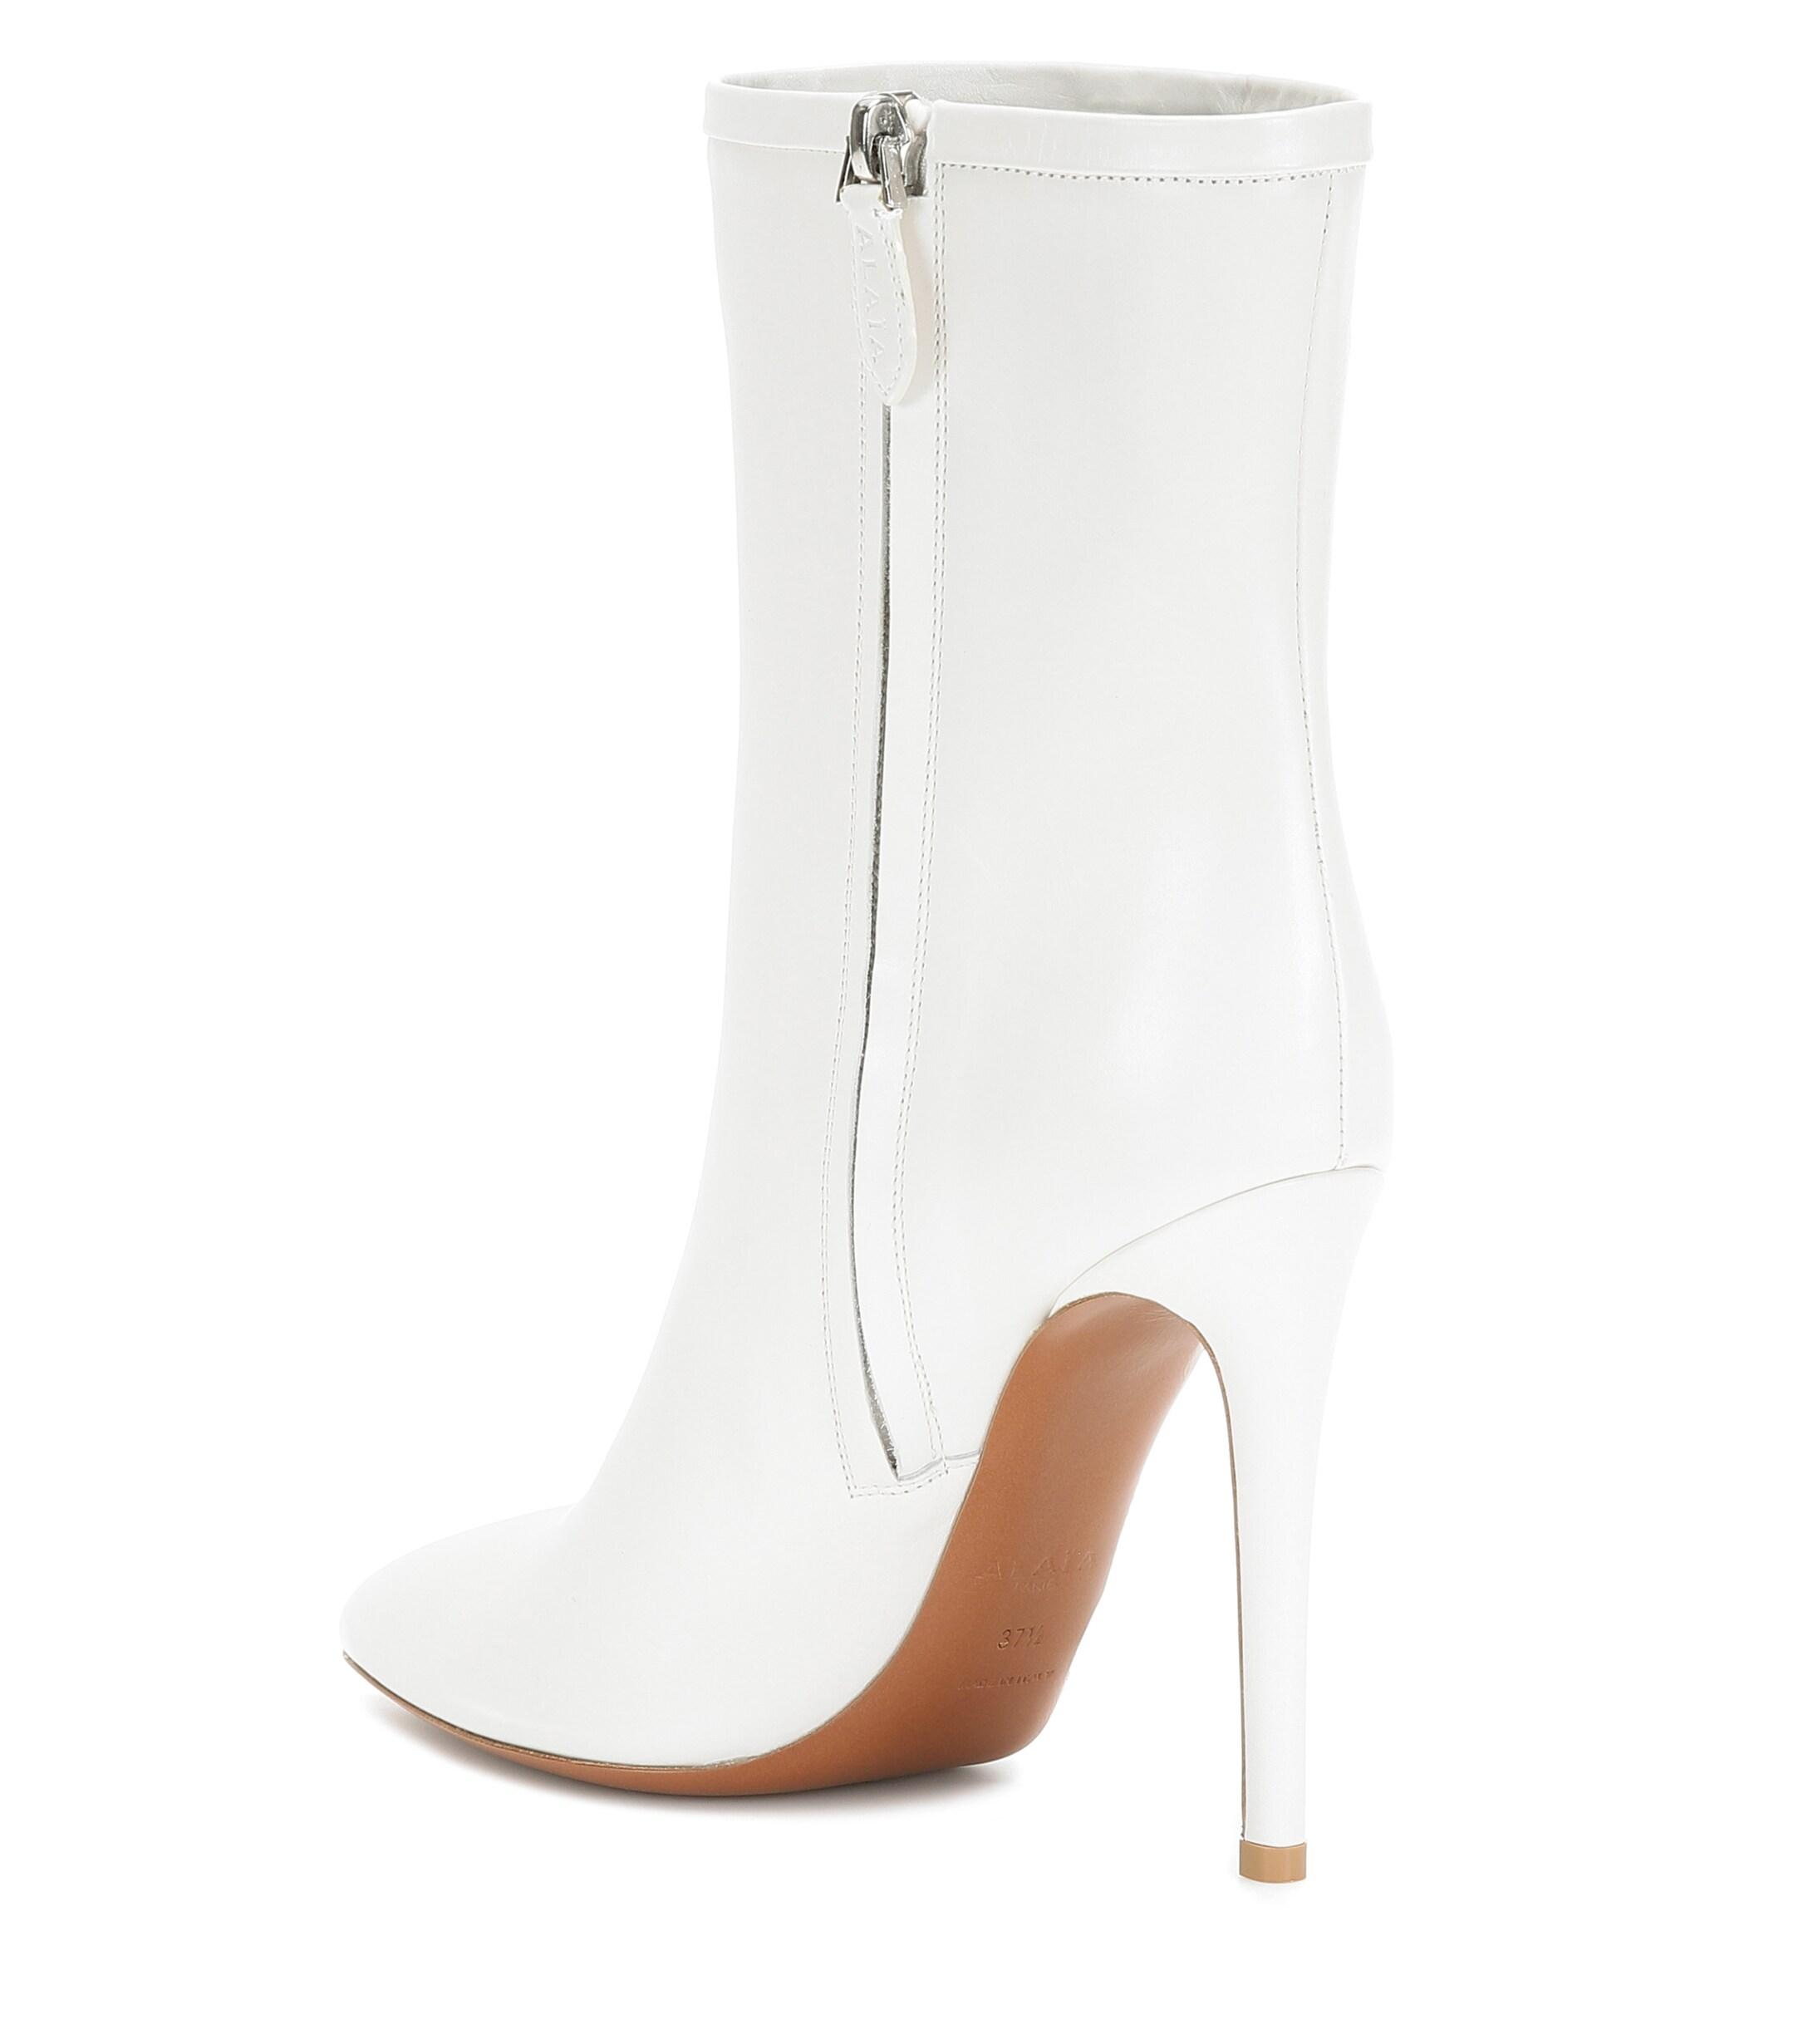 Alaïa Leather Ankle Boots in White - Lyst